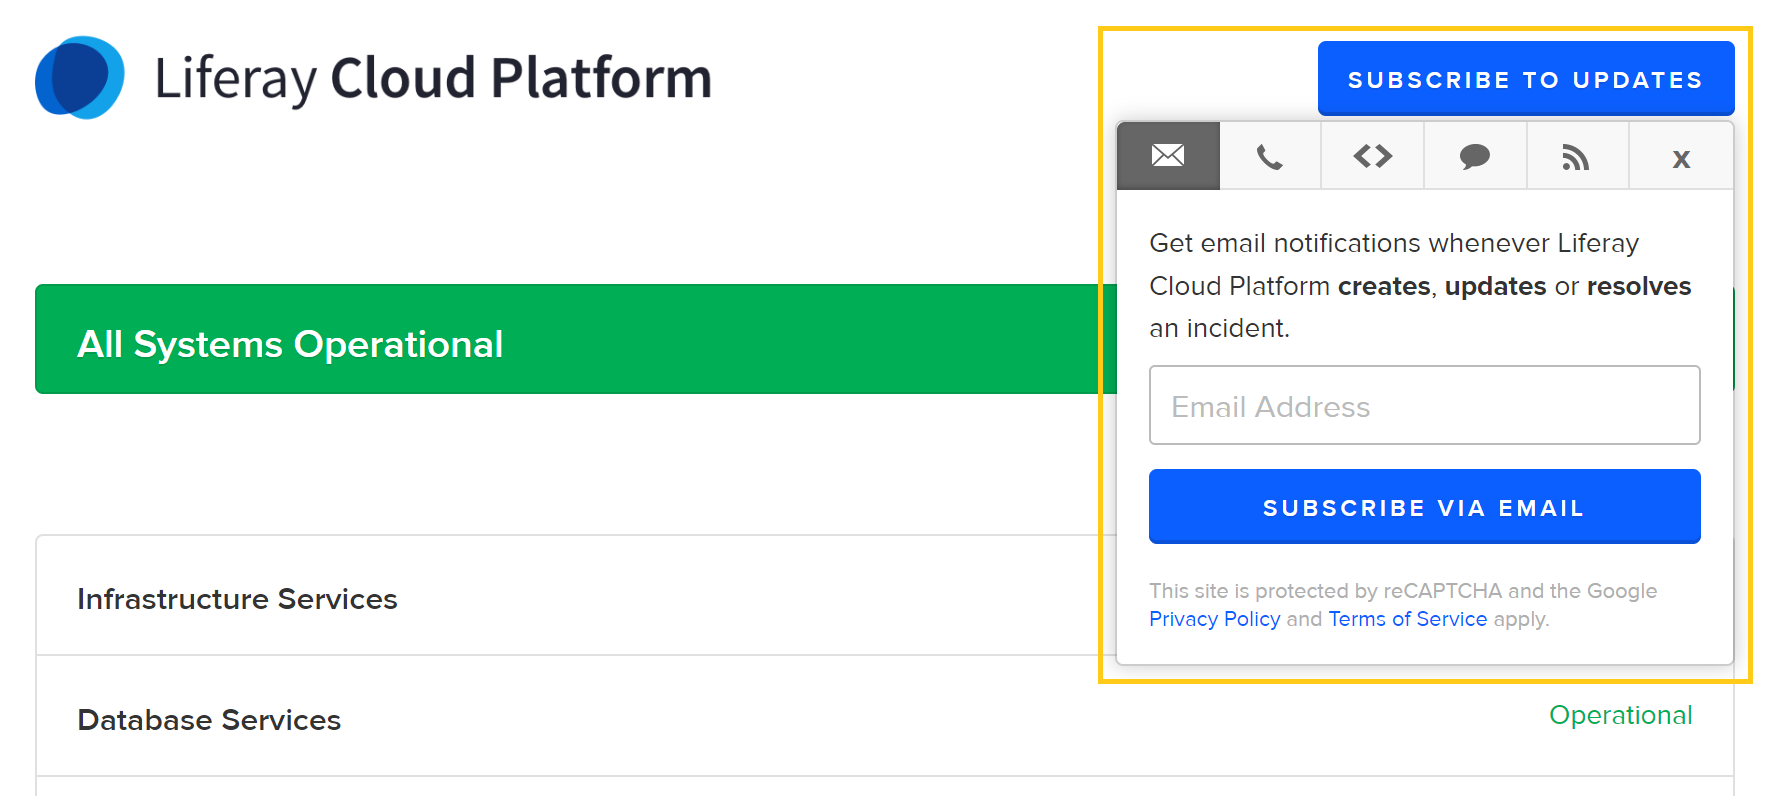 Figure 4: Subscribe to receive updates regarding the status of the Liferay Cloud Platform.